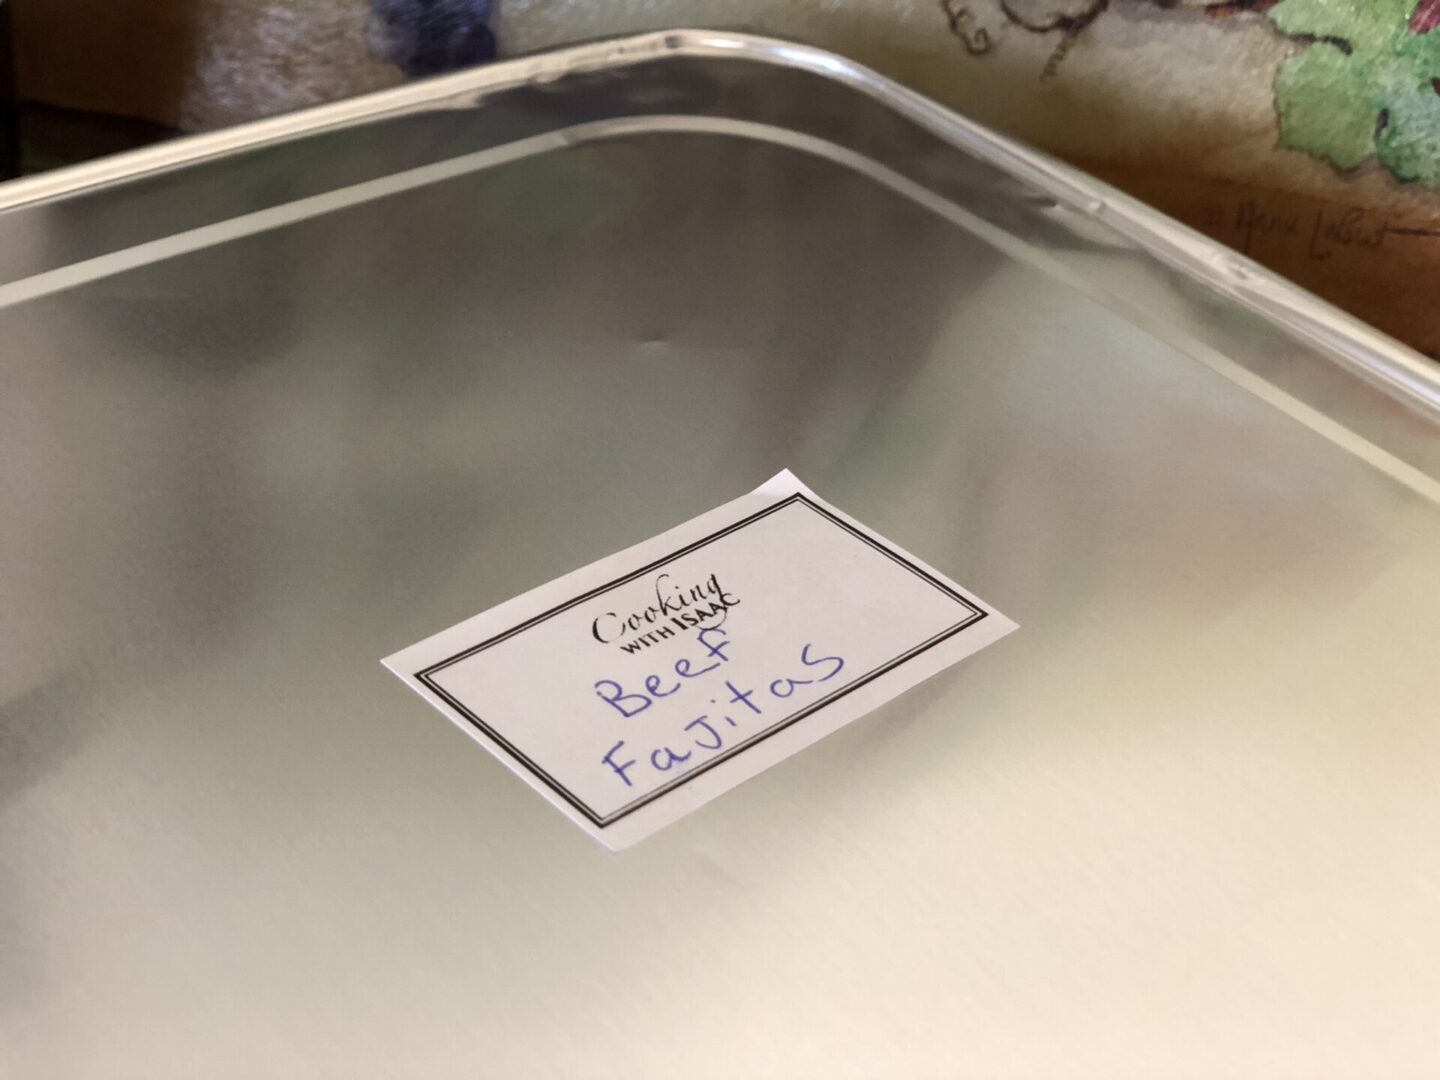 A metal pan with a label on it.